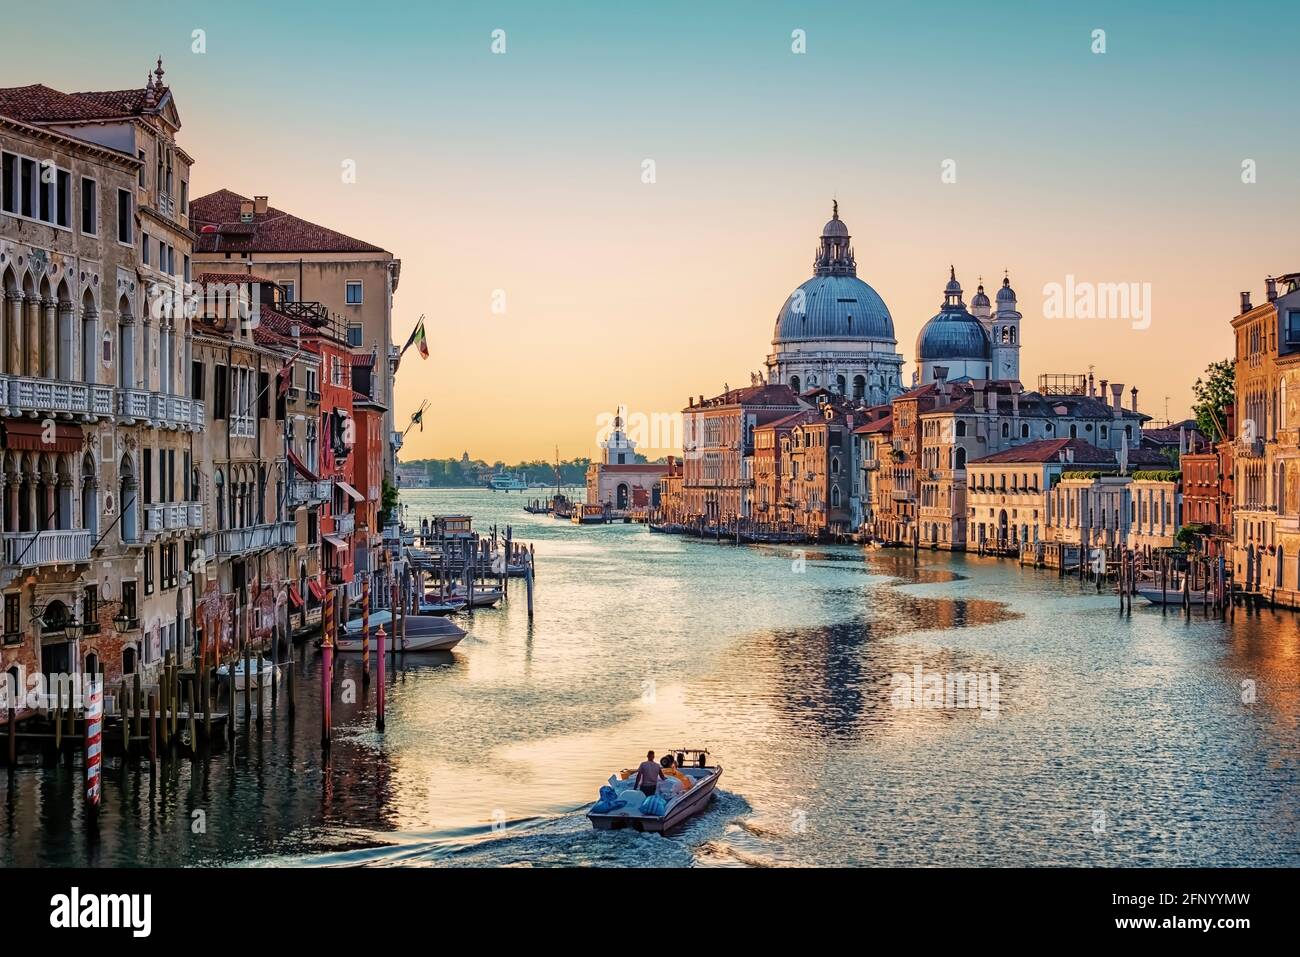 The city of Venice in the morning, Italy Stock Photo